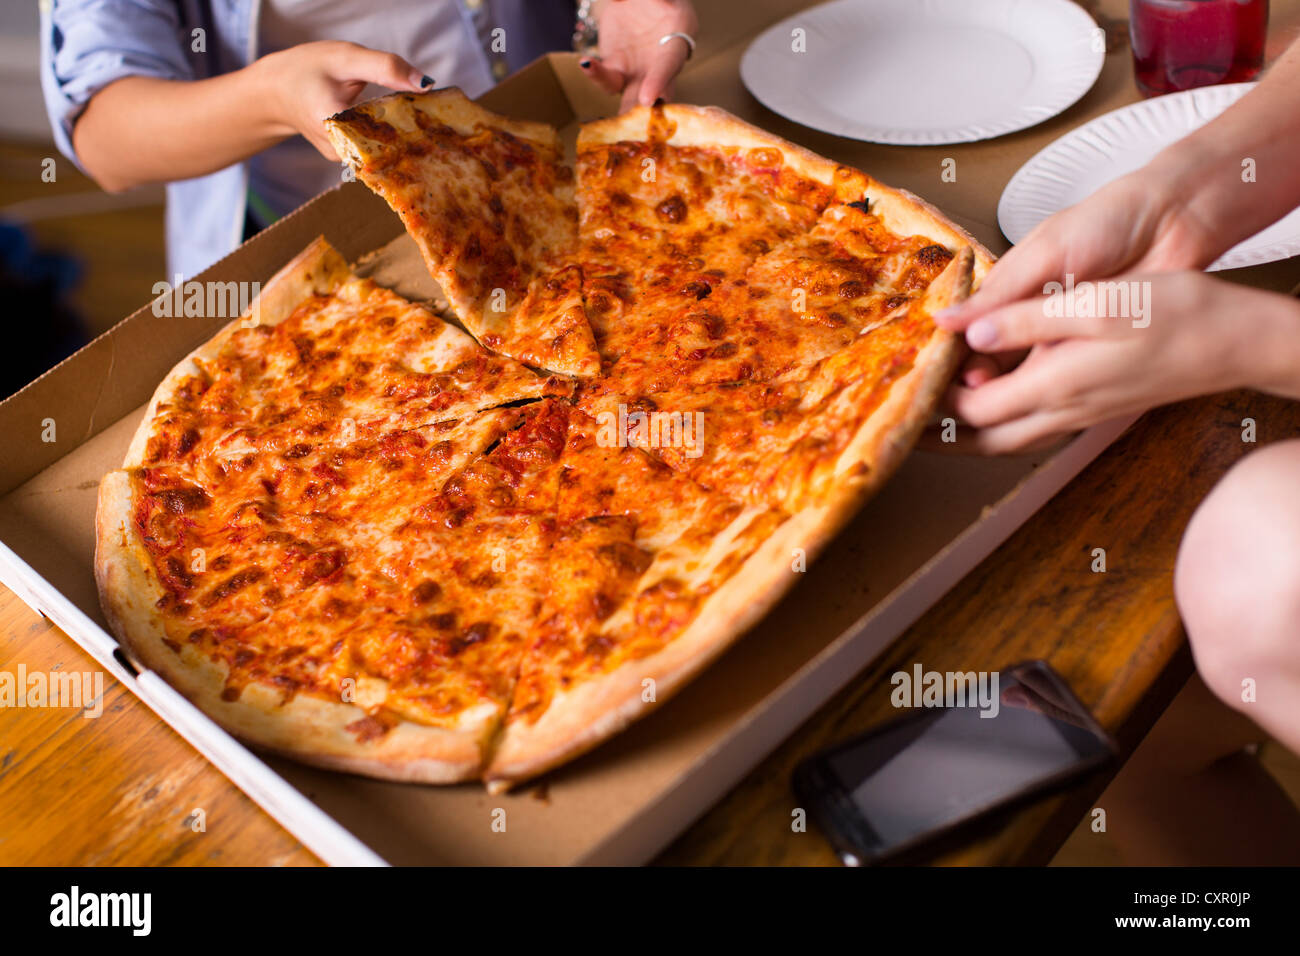 People sharing takeaway pizza Stock Photo